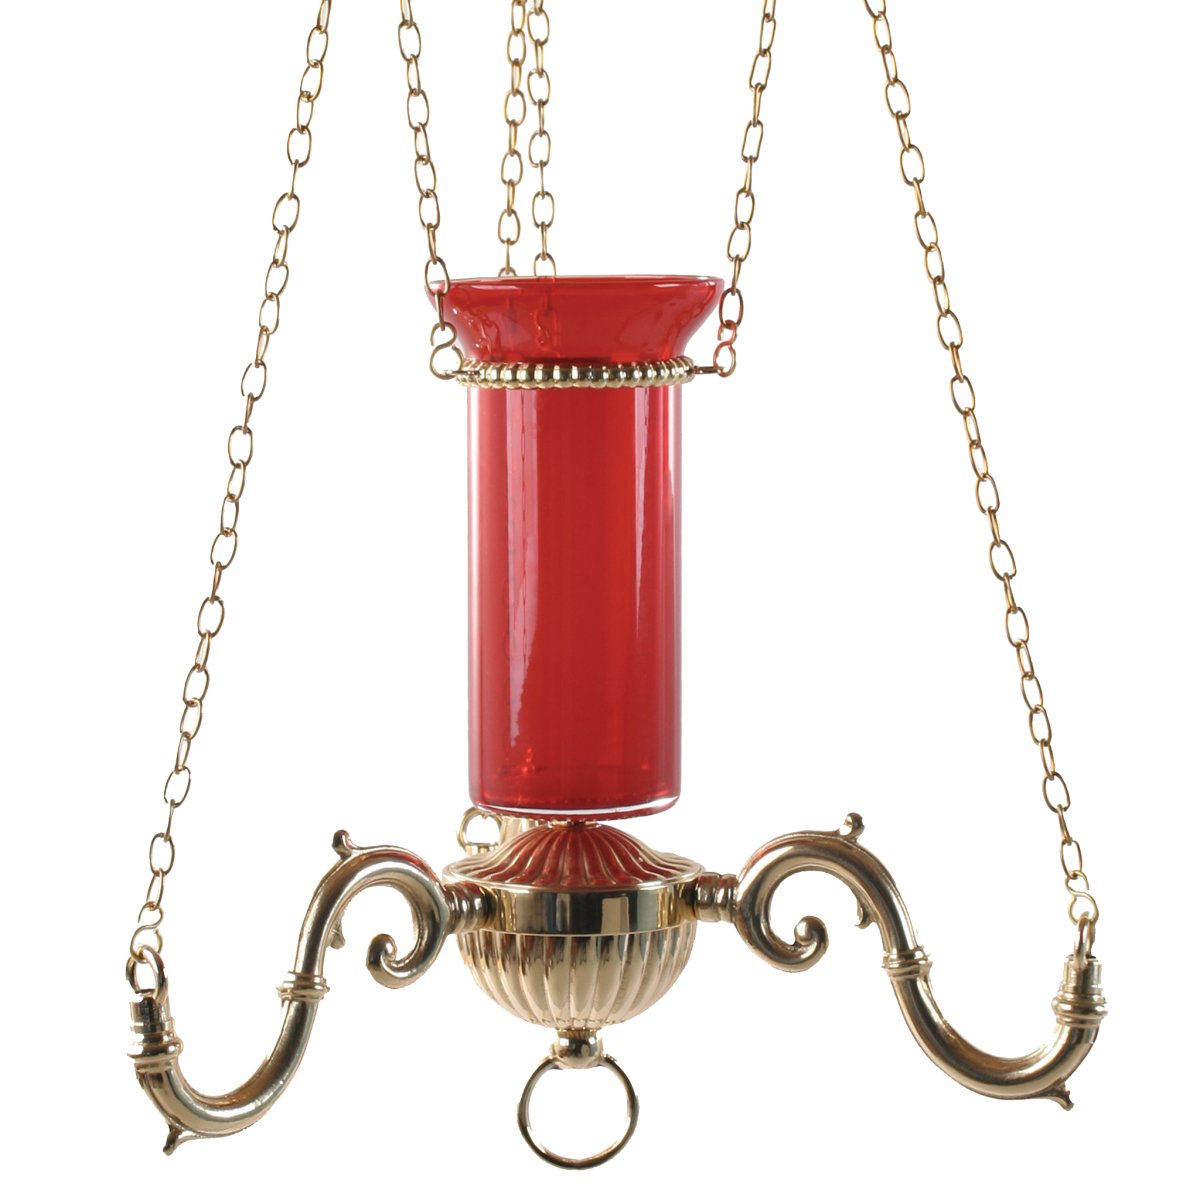 Three Arm Sanctuary Hanging Lamp - Hayes & Finch